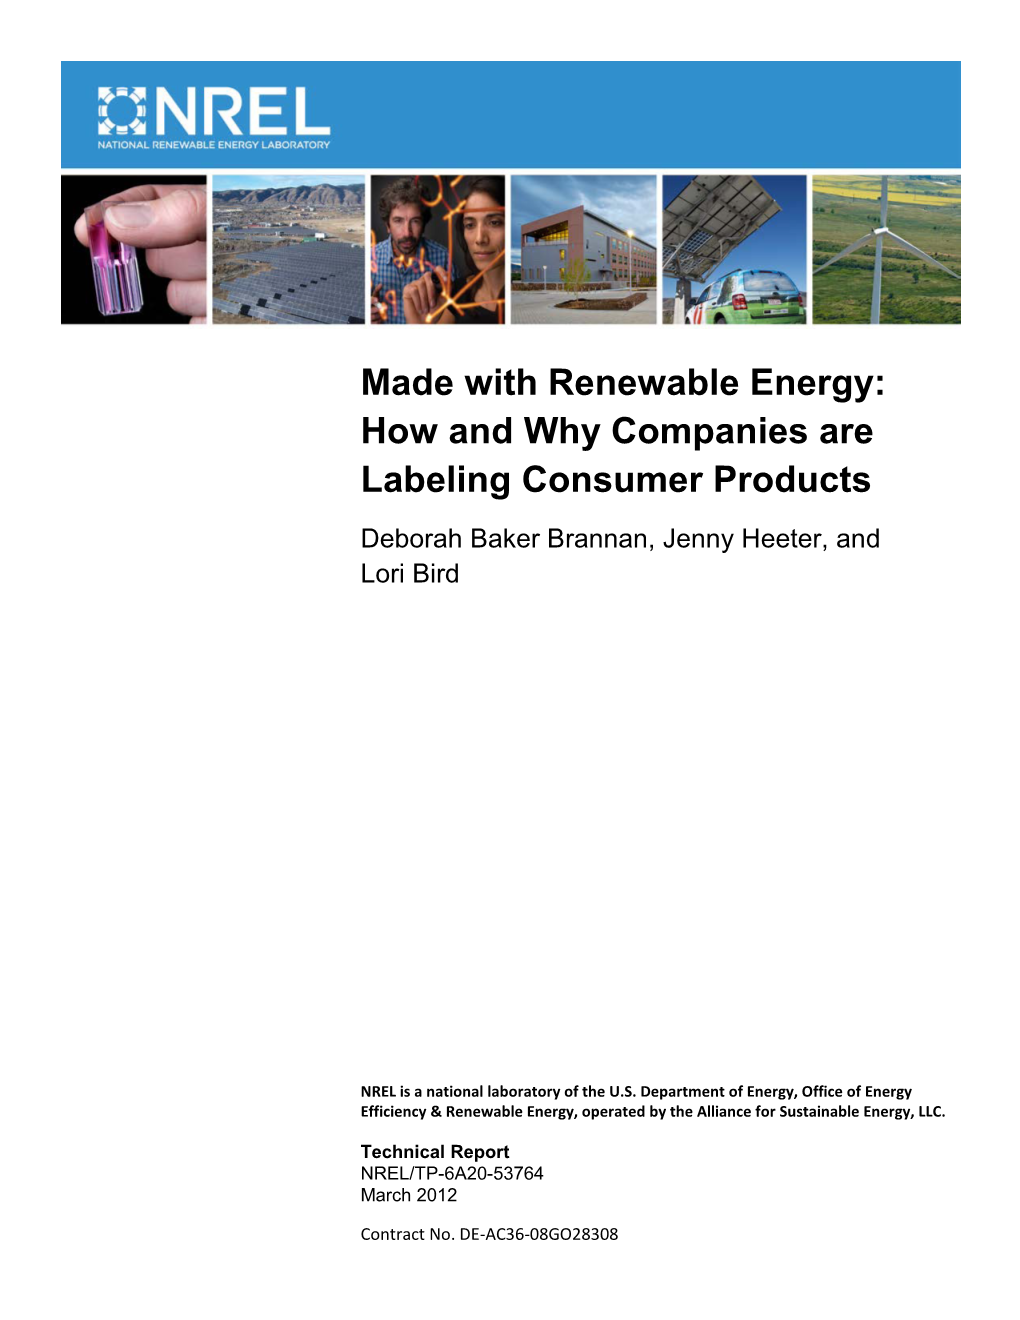 Made with Renewable Energy: How and Why Companies Are Labeling Consumer Products Deborah Baker Brannan, Jenny Heeter, and Lori Bird